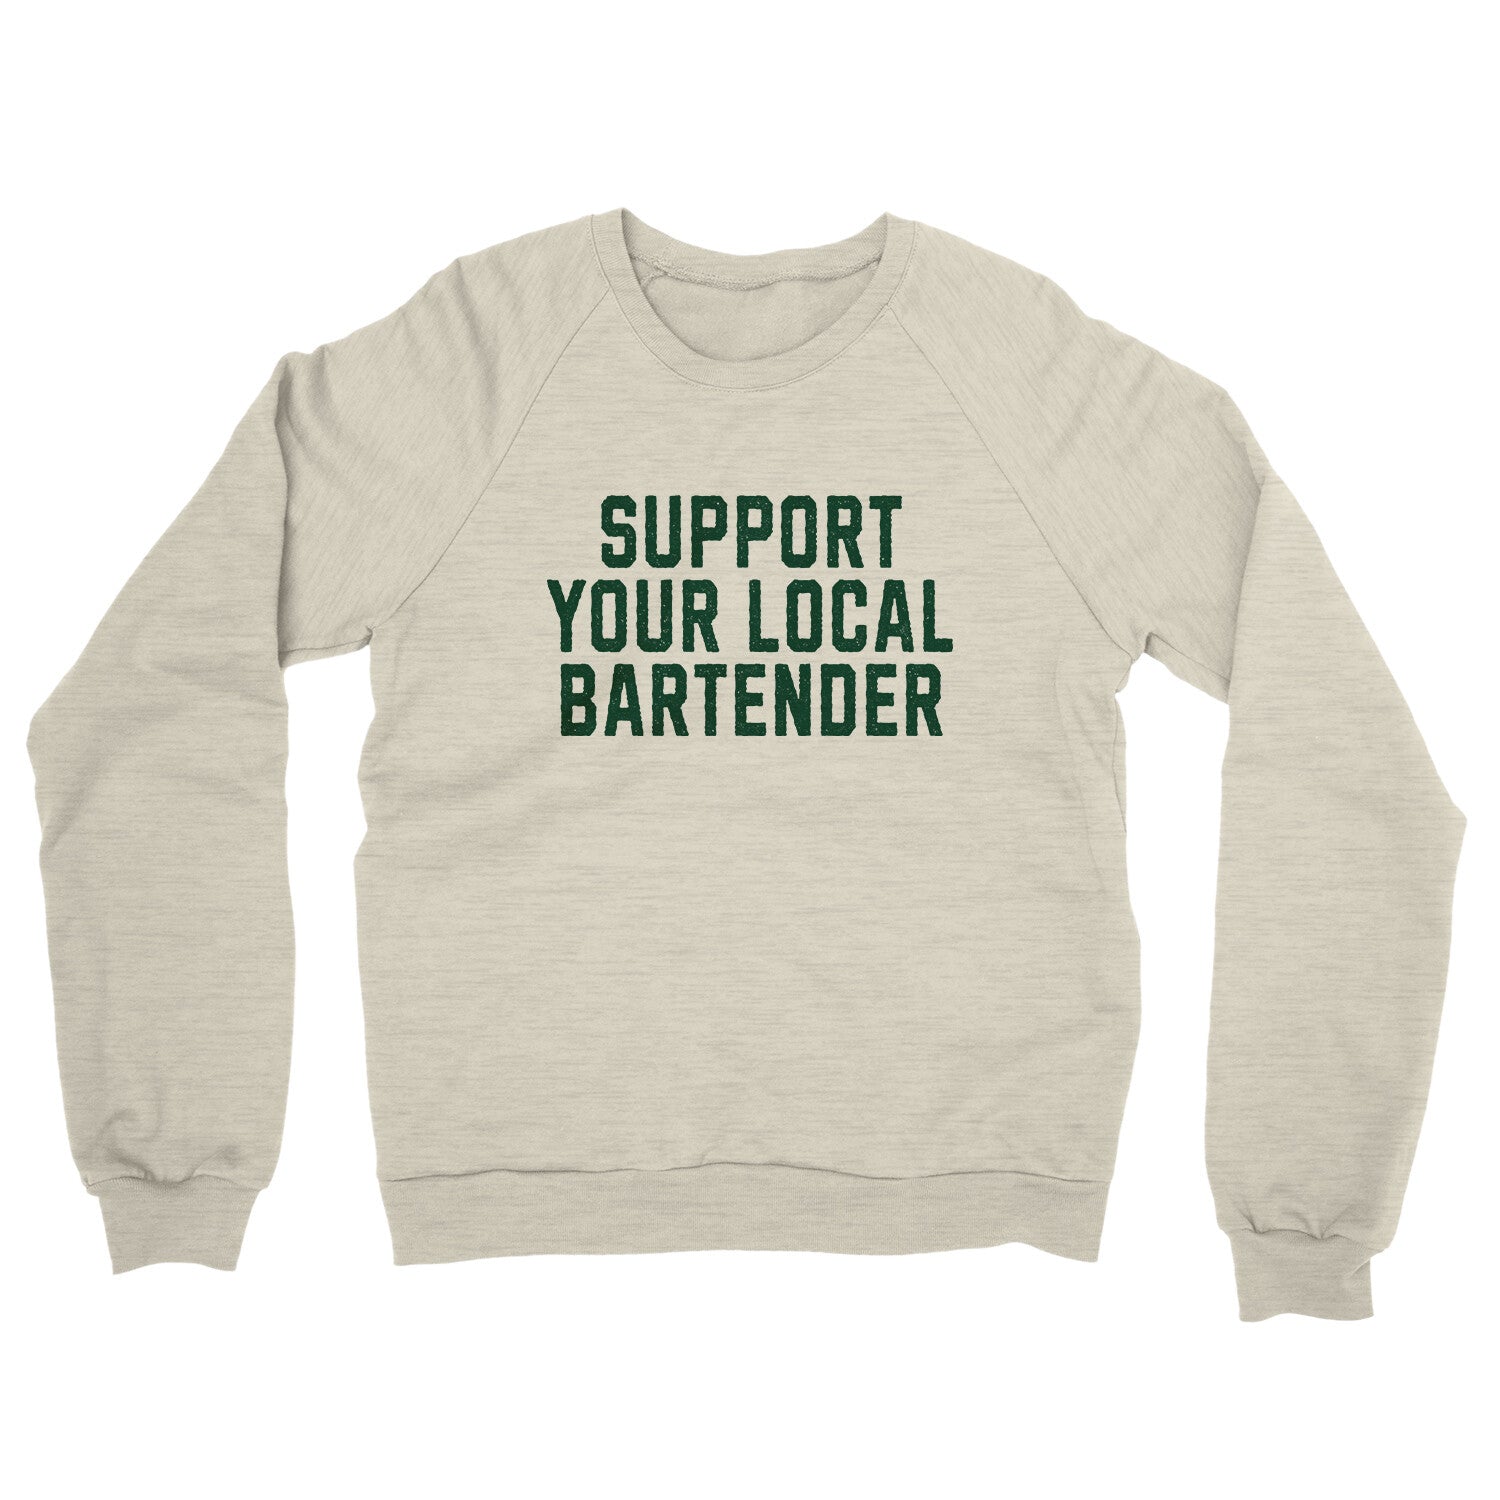 Support your Local Bartender in Heather Oatmeal Color